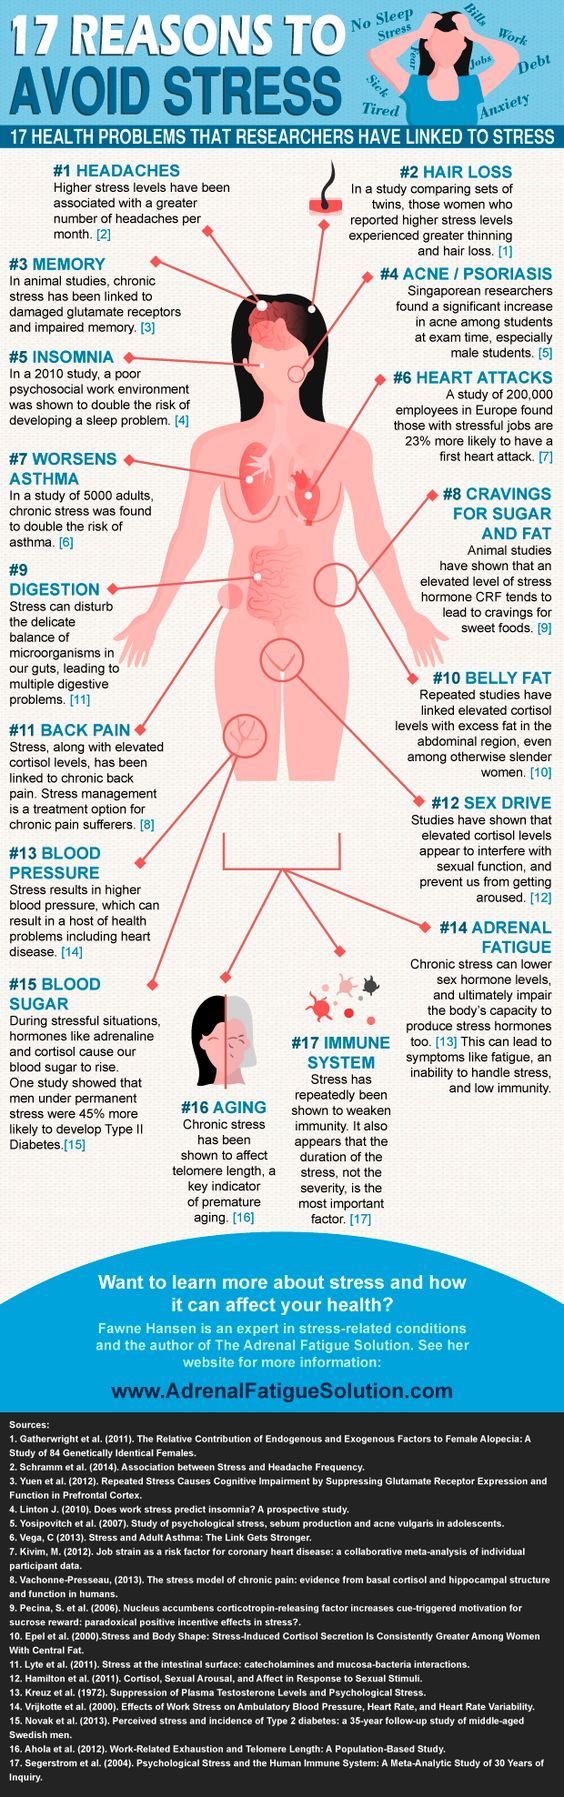 1561280962_900_Psychology-Infographic-17-Reasons-To-Avoid-Stress-Infographic Psychology Infographic : 17 Reasons To Avoid Stress (Infographic)